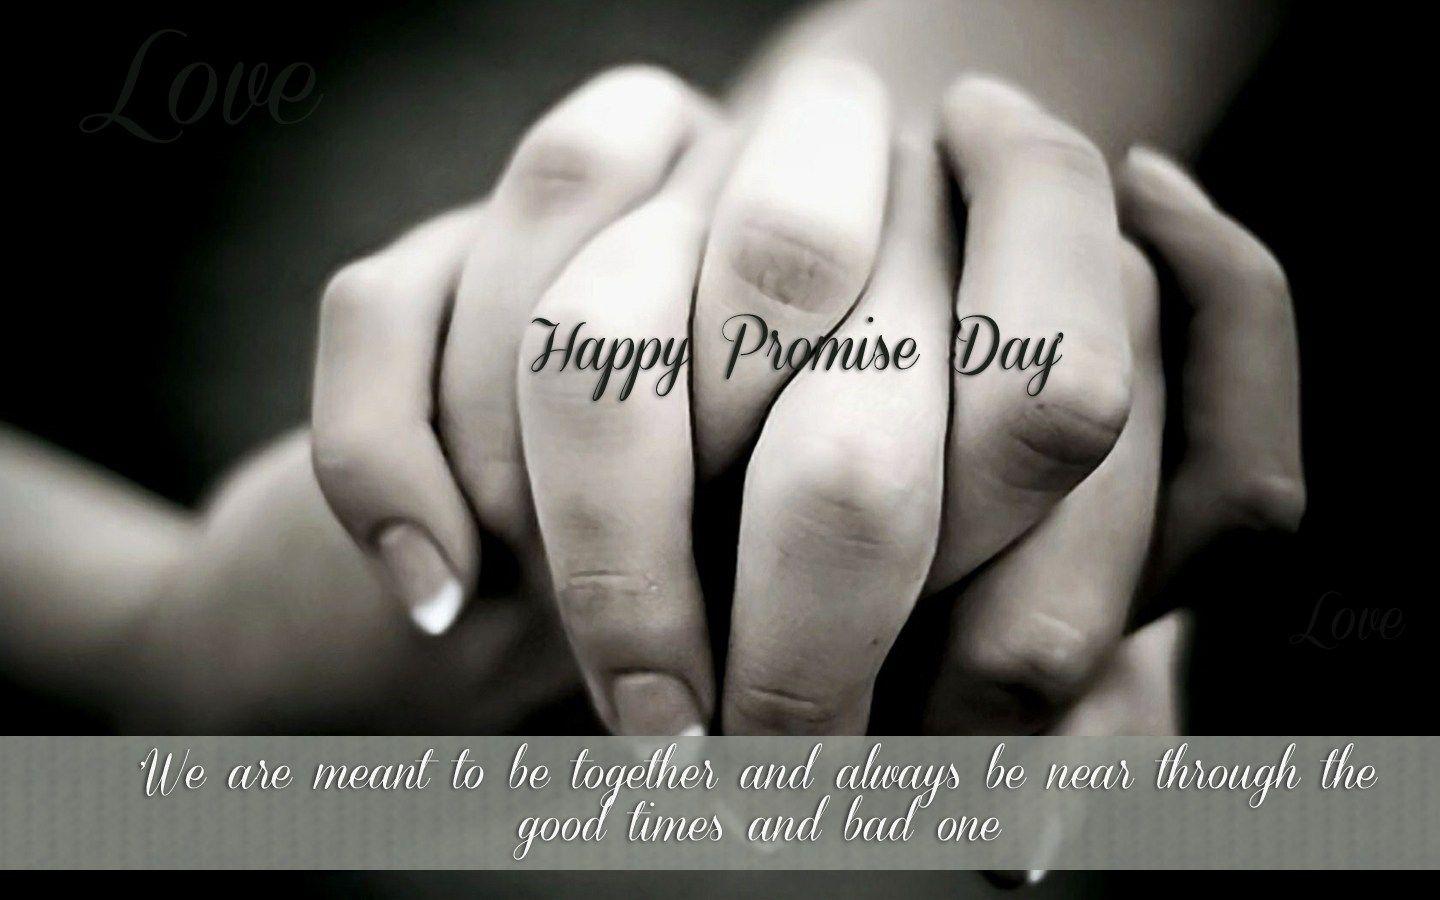 promise wallpaper for happy promise day 2016. Happy promise day